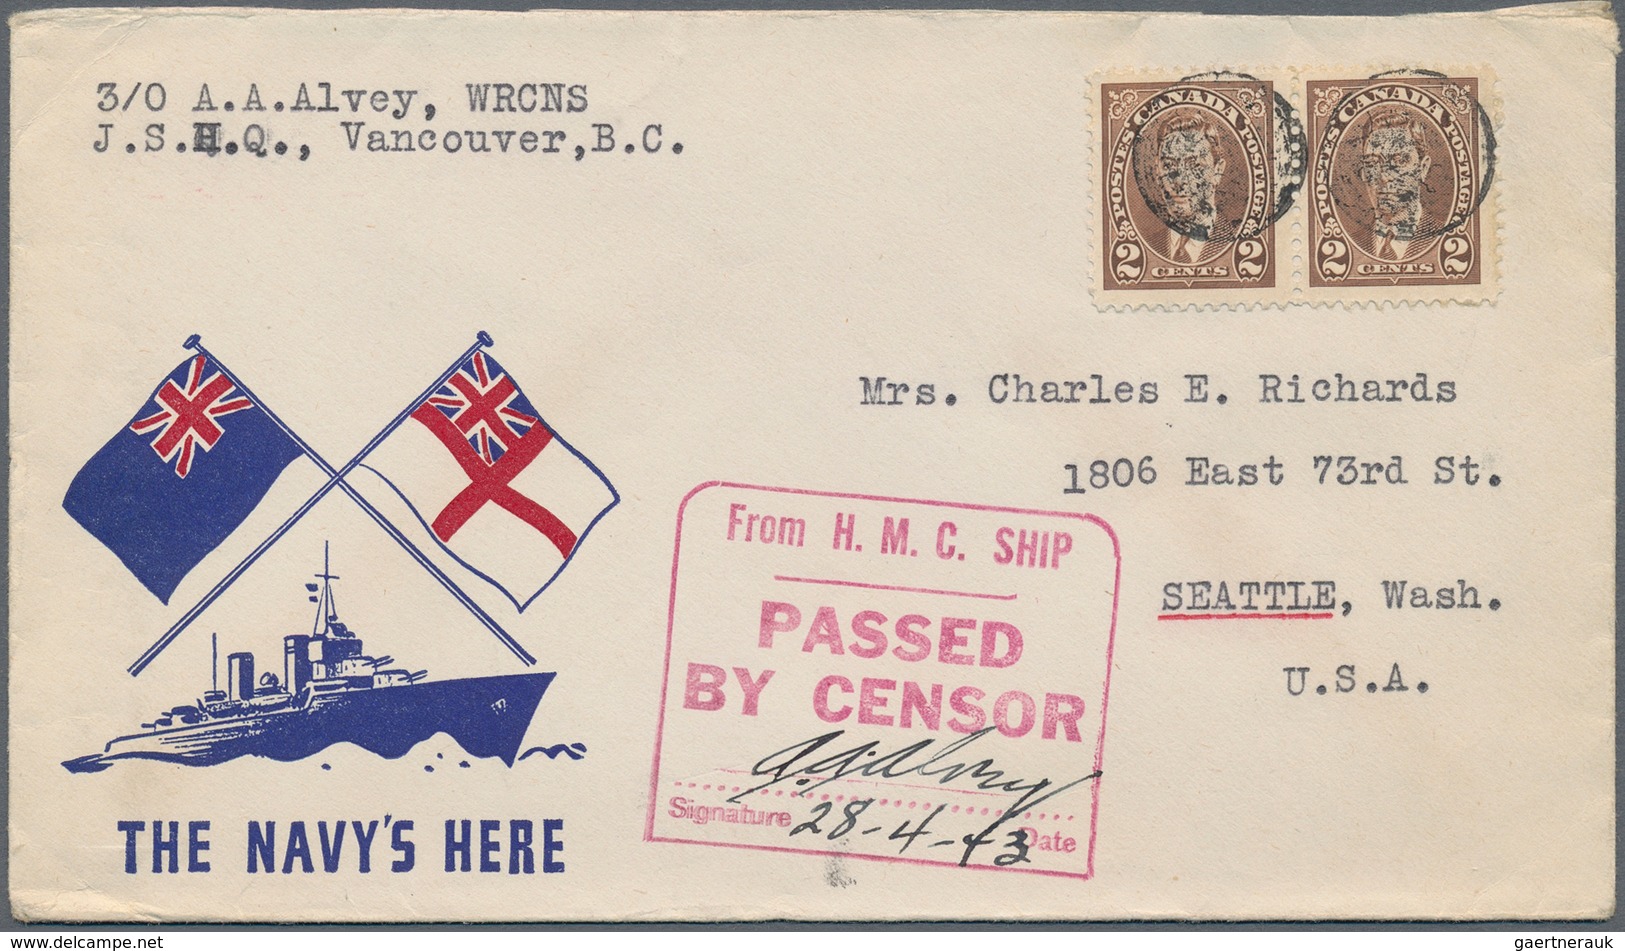 Kanada: 1941/45 ca. 290 letters, cards and covers, fieldpost incl. Canadian forces abroad, service l